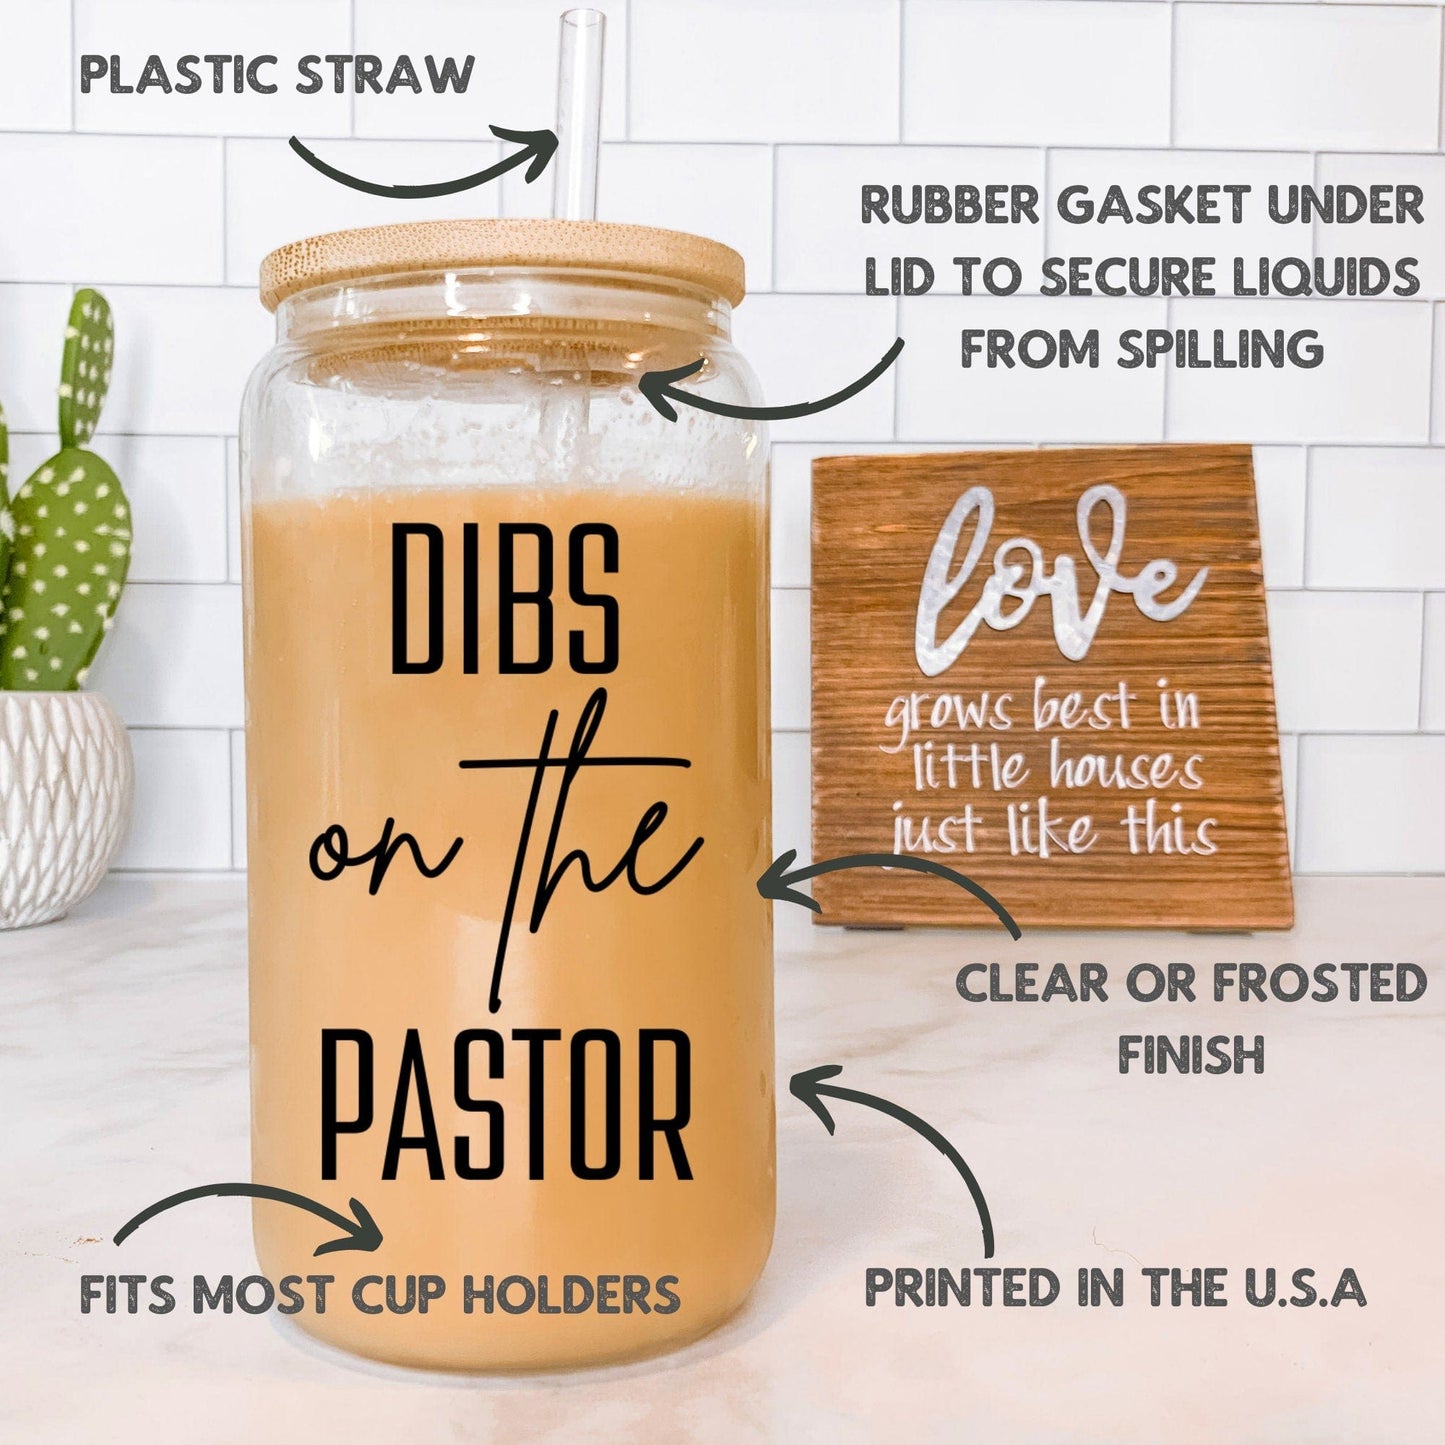 Dibs on the pastor Iced Coffee Cup Personalized Preacher Coffee Frosted Tumbler Pastors wife Glass Tumbler with straw Preacher's Wife gifts